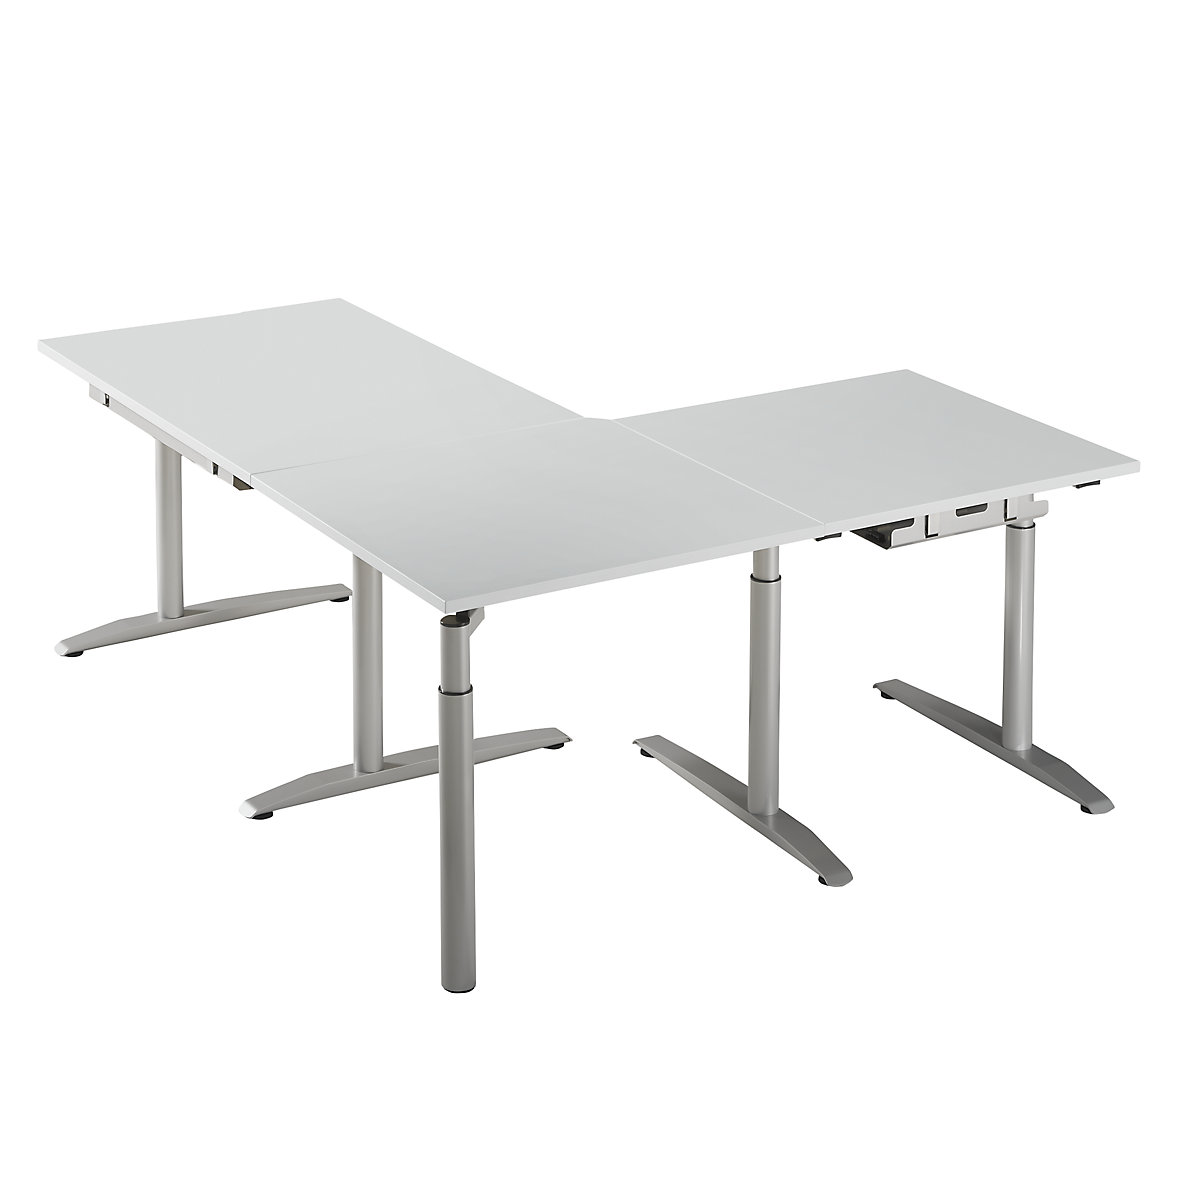 Linking top, height adjustable from 650 – 850 mm HANNA, 90°, with support leg, light grey-5